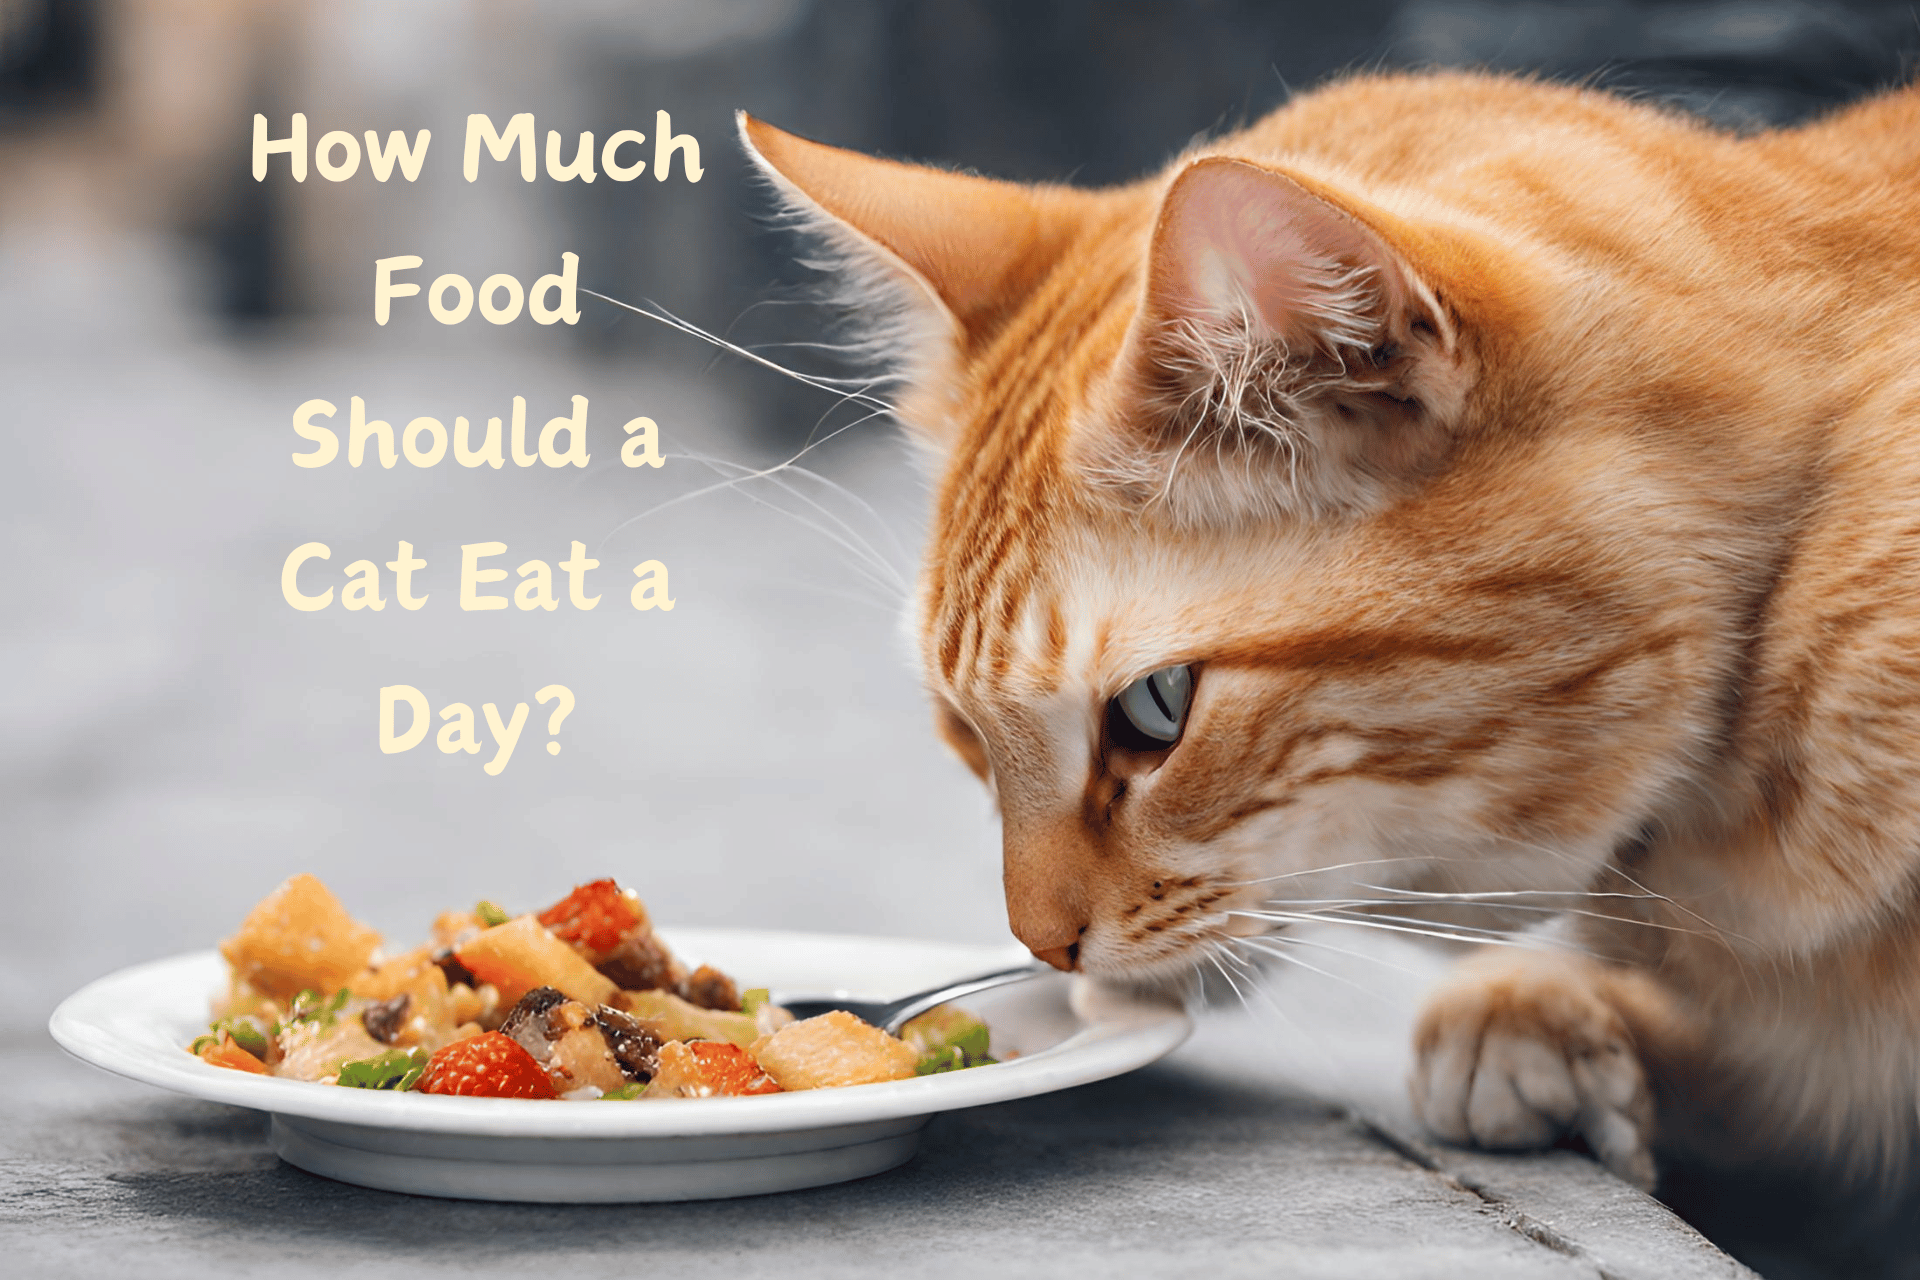 A cat food guide